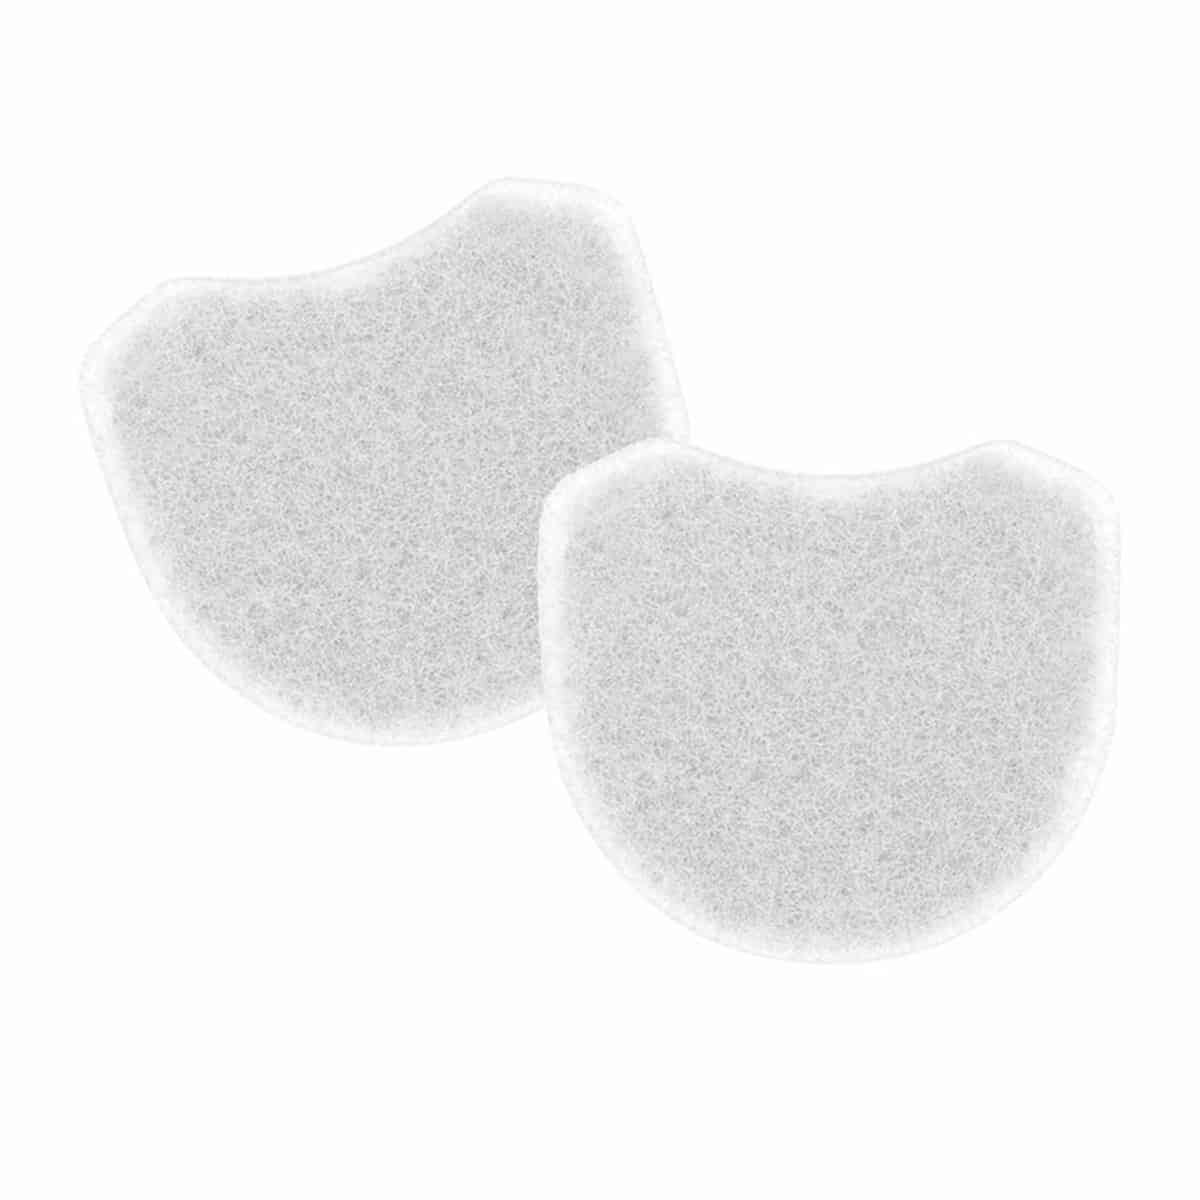 ResMed AirMini Filter (2 pack)